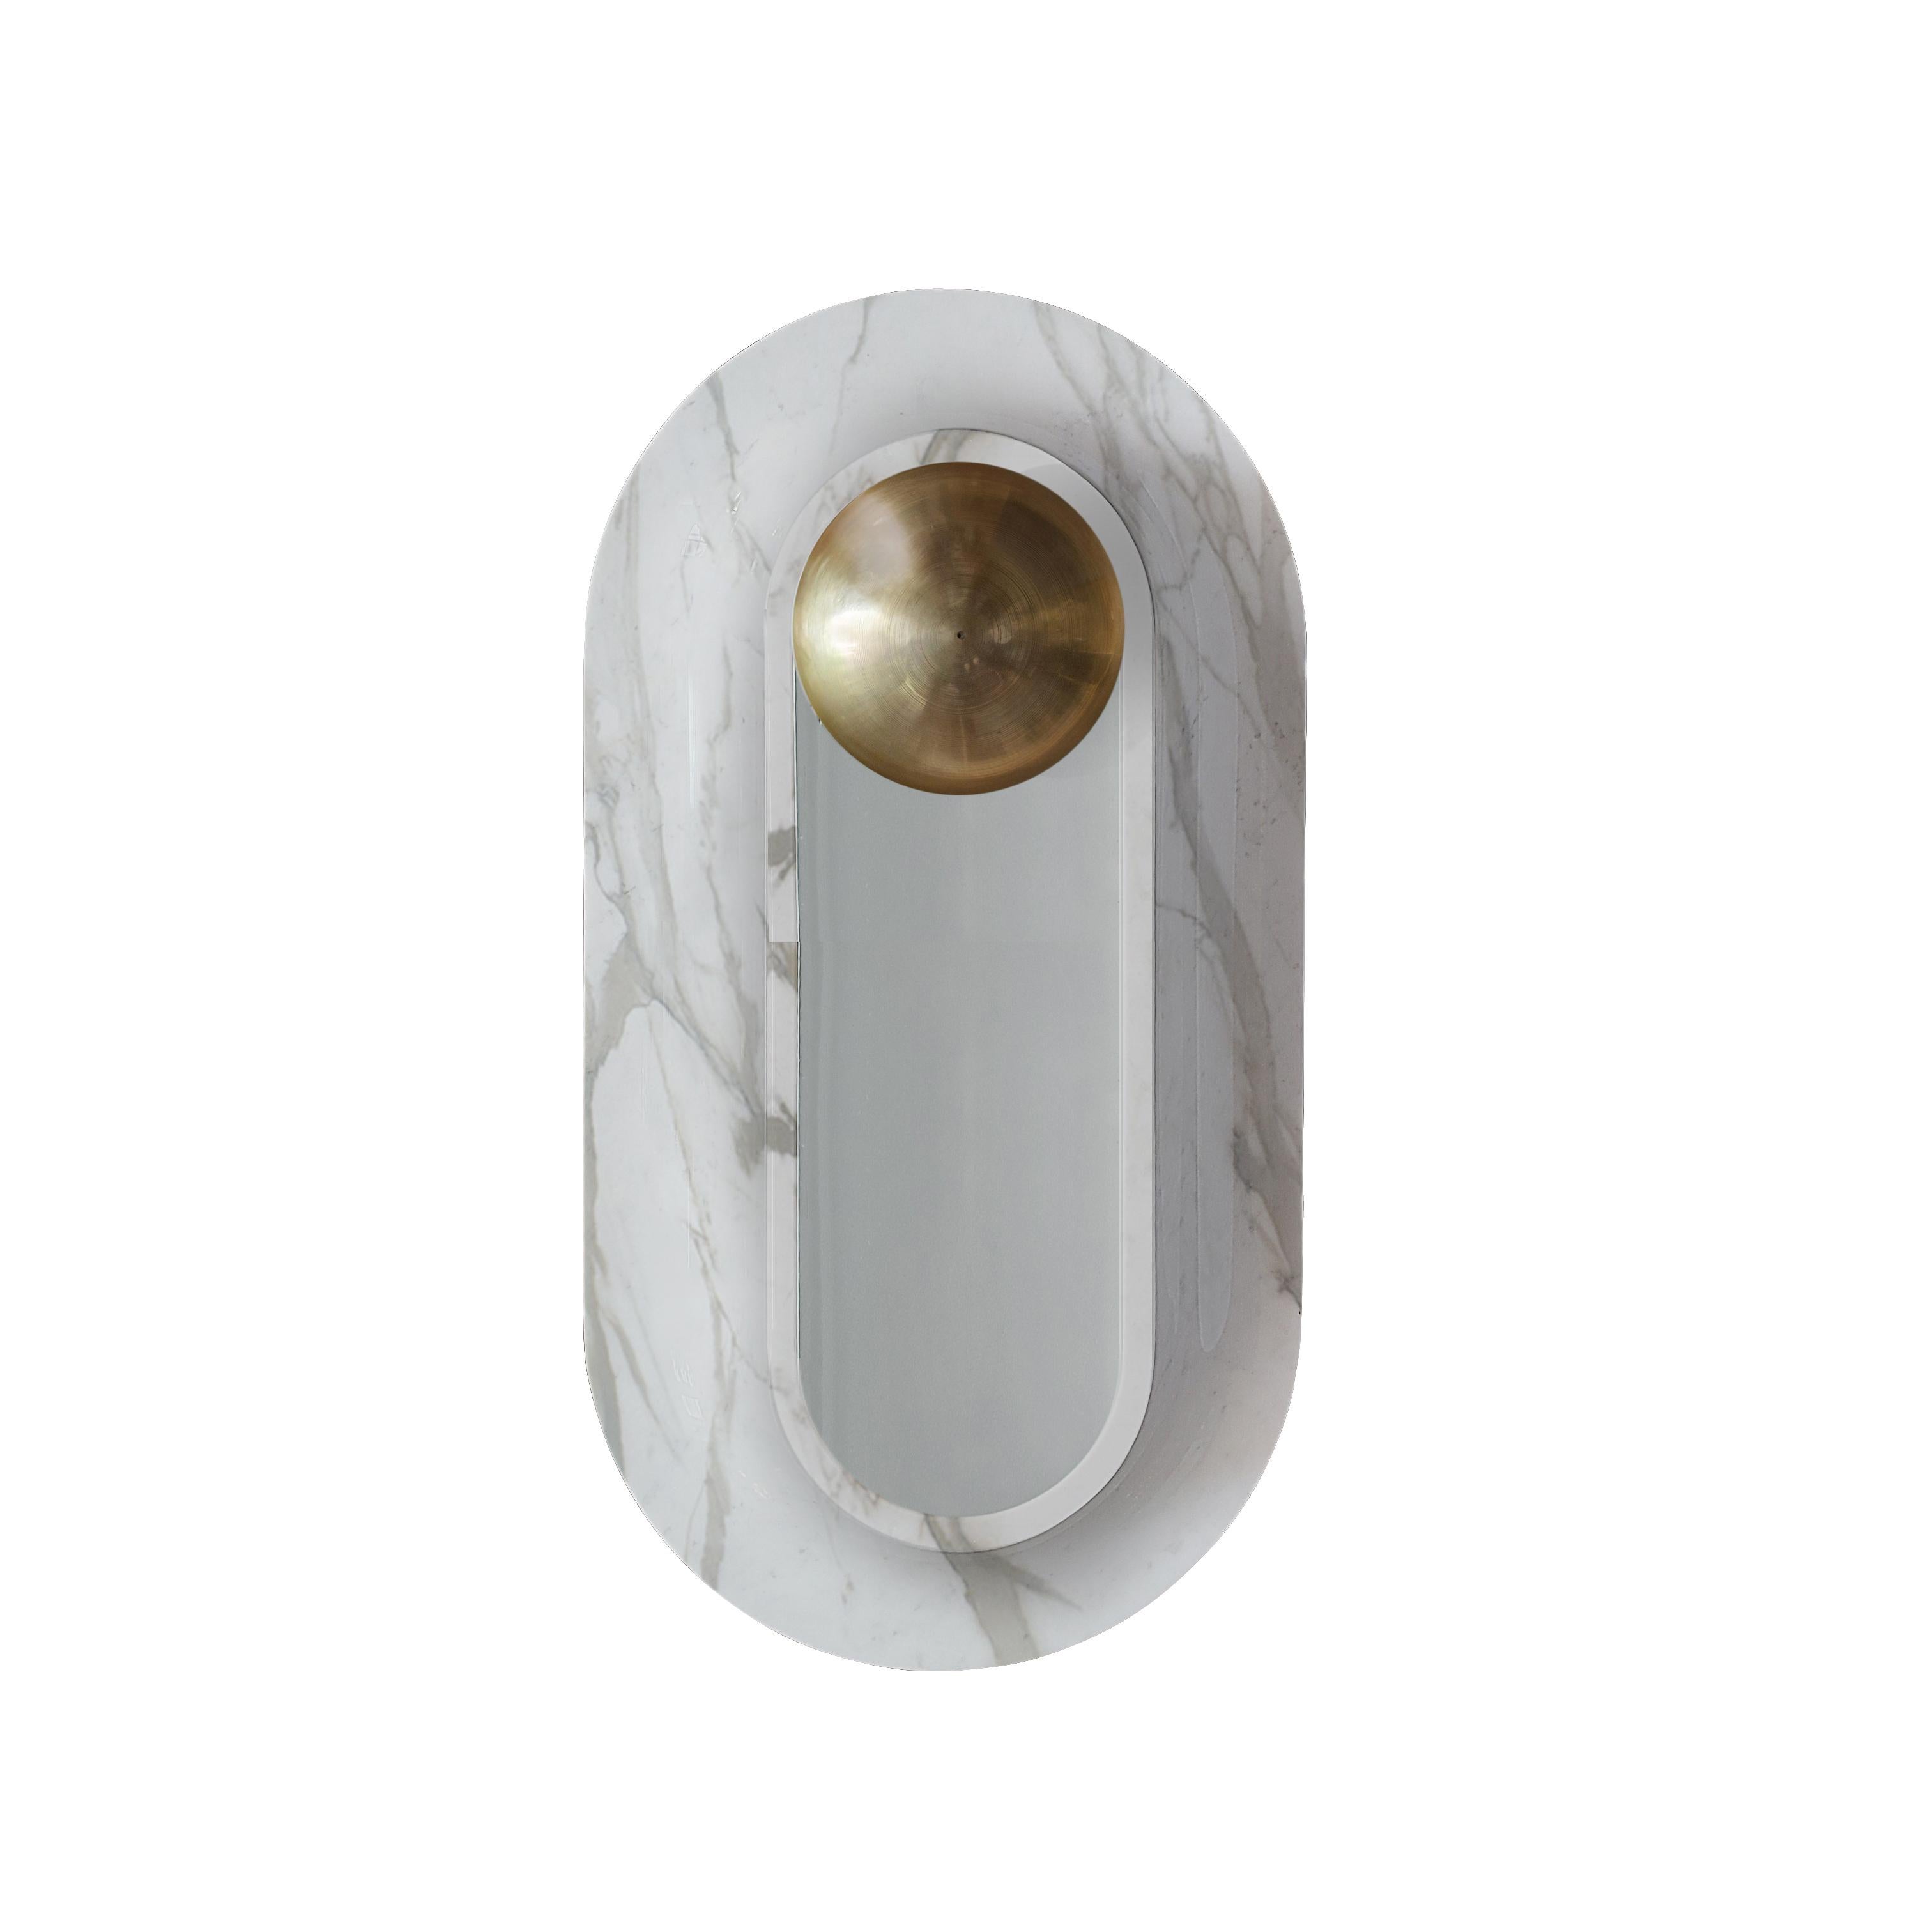 Pfaffikon sconce by Jan Garncarek
Dimensions: D 12 x W 25 x H 46 cm
Material: Brass, glass, Carrara marble.

Information:
weight: 7 kg / 33 lb
voltage: 120V, 240V
lamping: 1 X 12 W dimmable LED module
lumens:1000 Im
kcolortemperature:2700